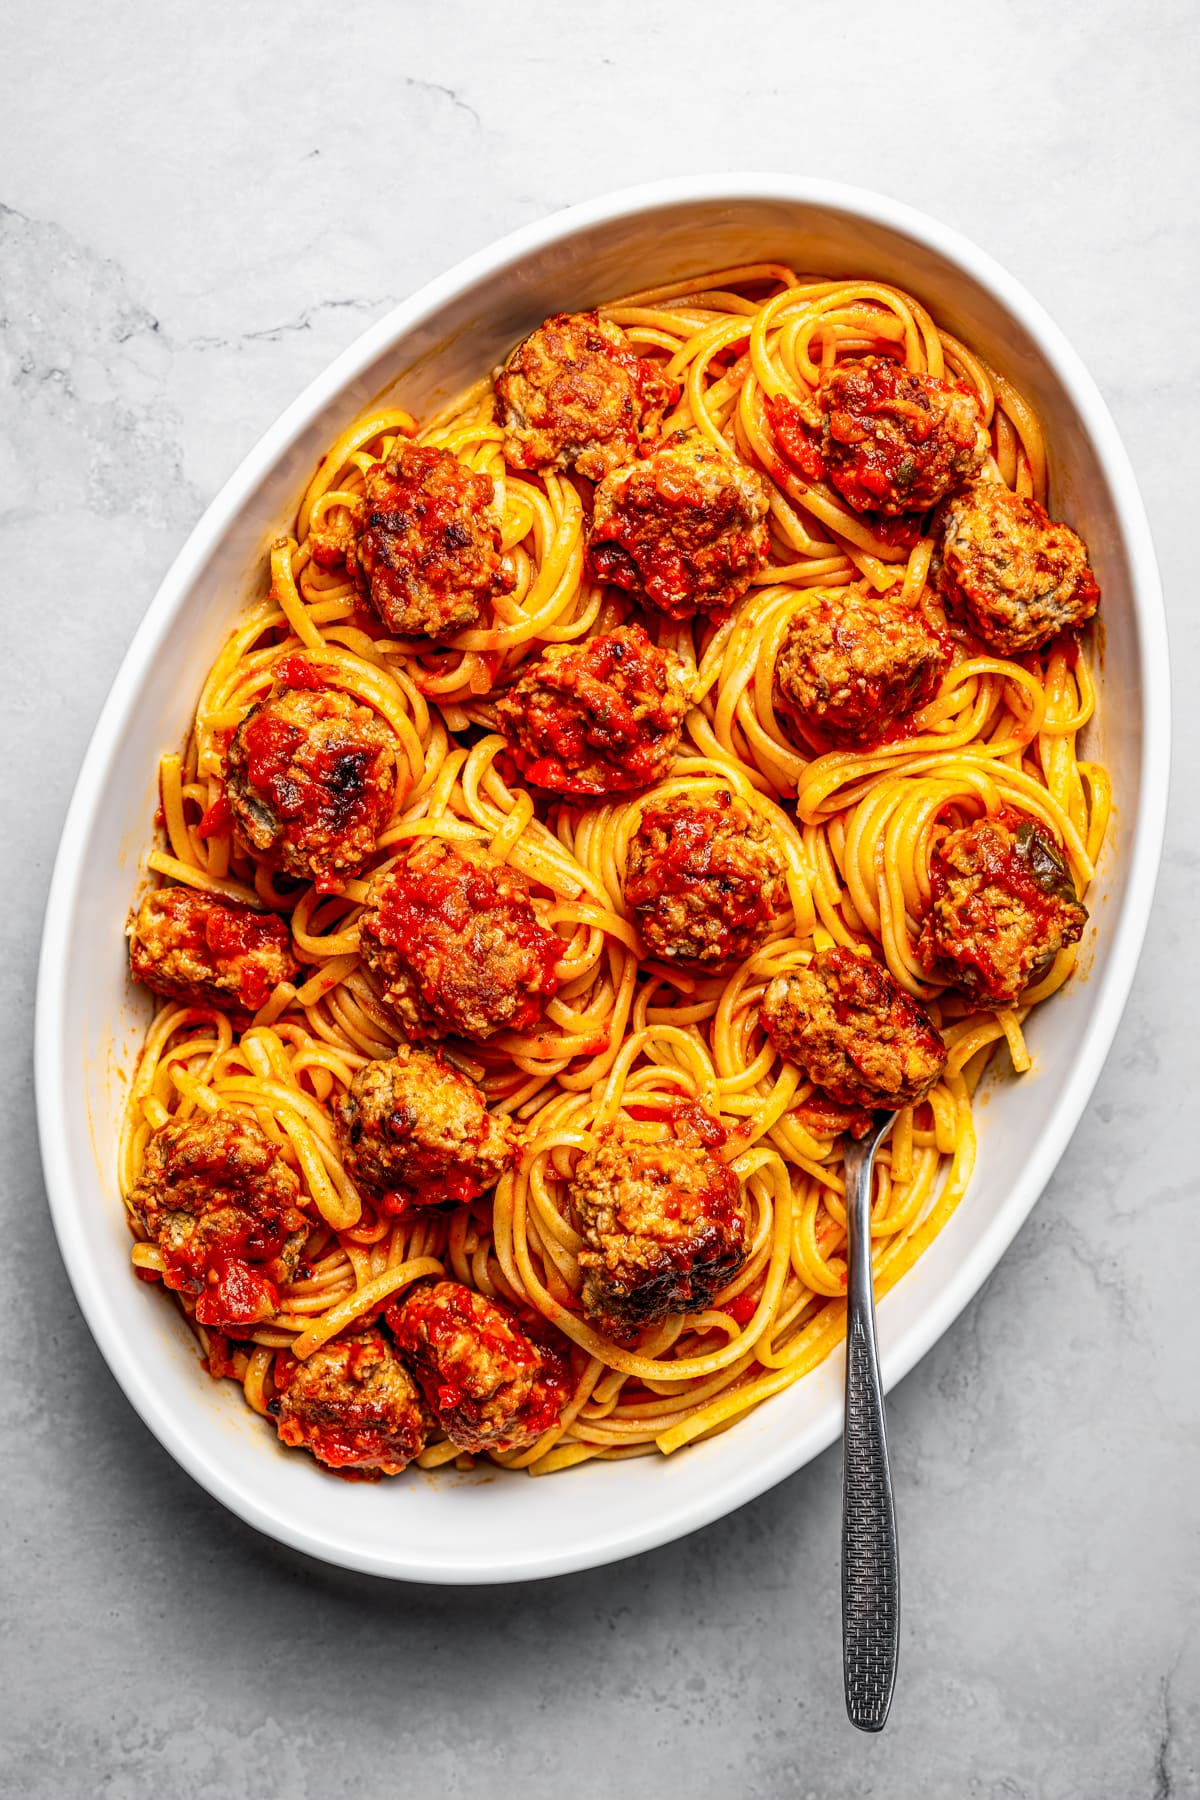 Overhead view of a large platter of spaghetti and pork meatballs.